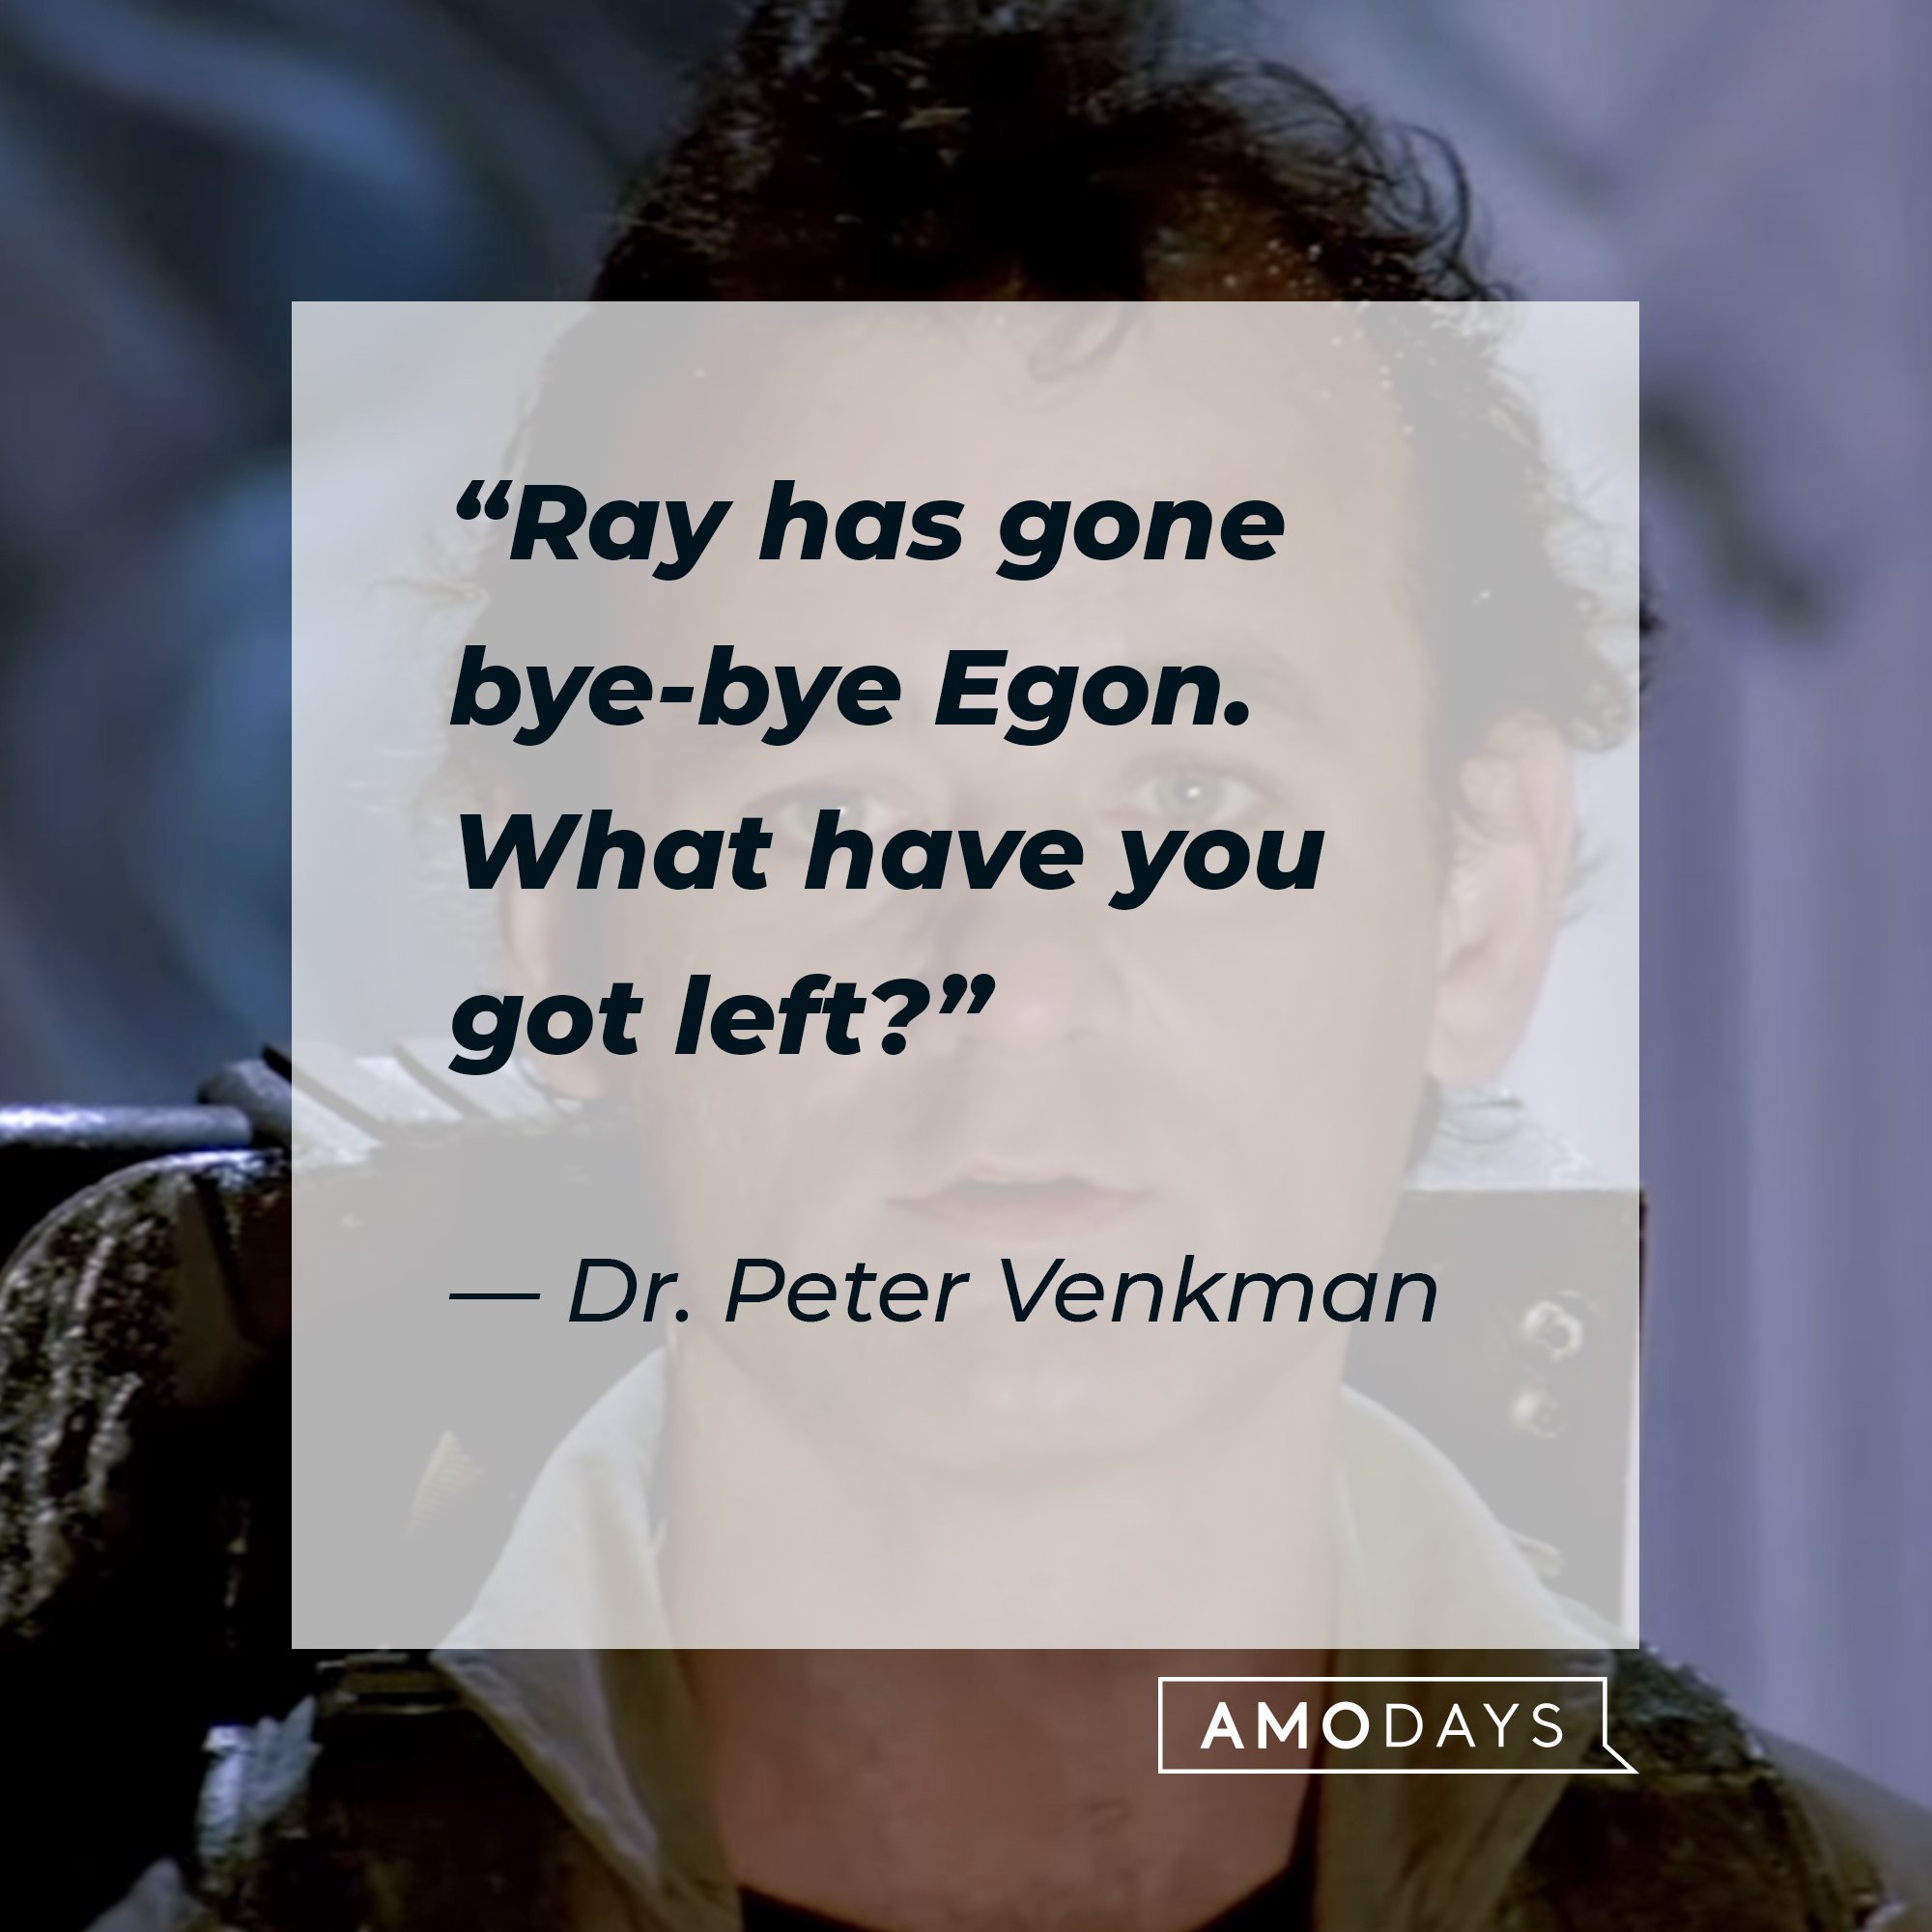 Dr. Peter Venkman's quote: “Ray has gone bye-bye Egon. What have you got left?” | Image: AmoDays